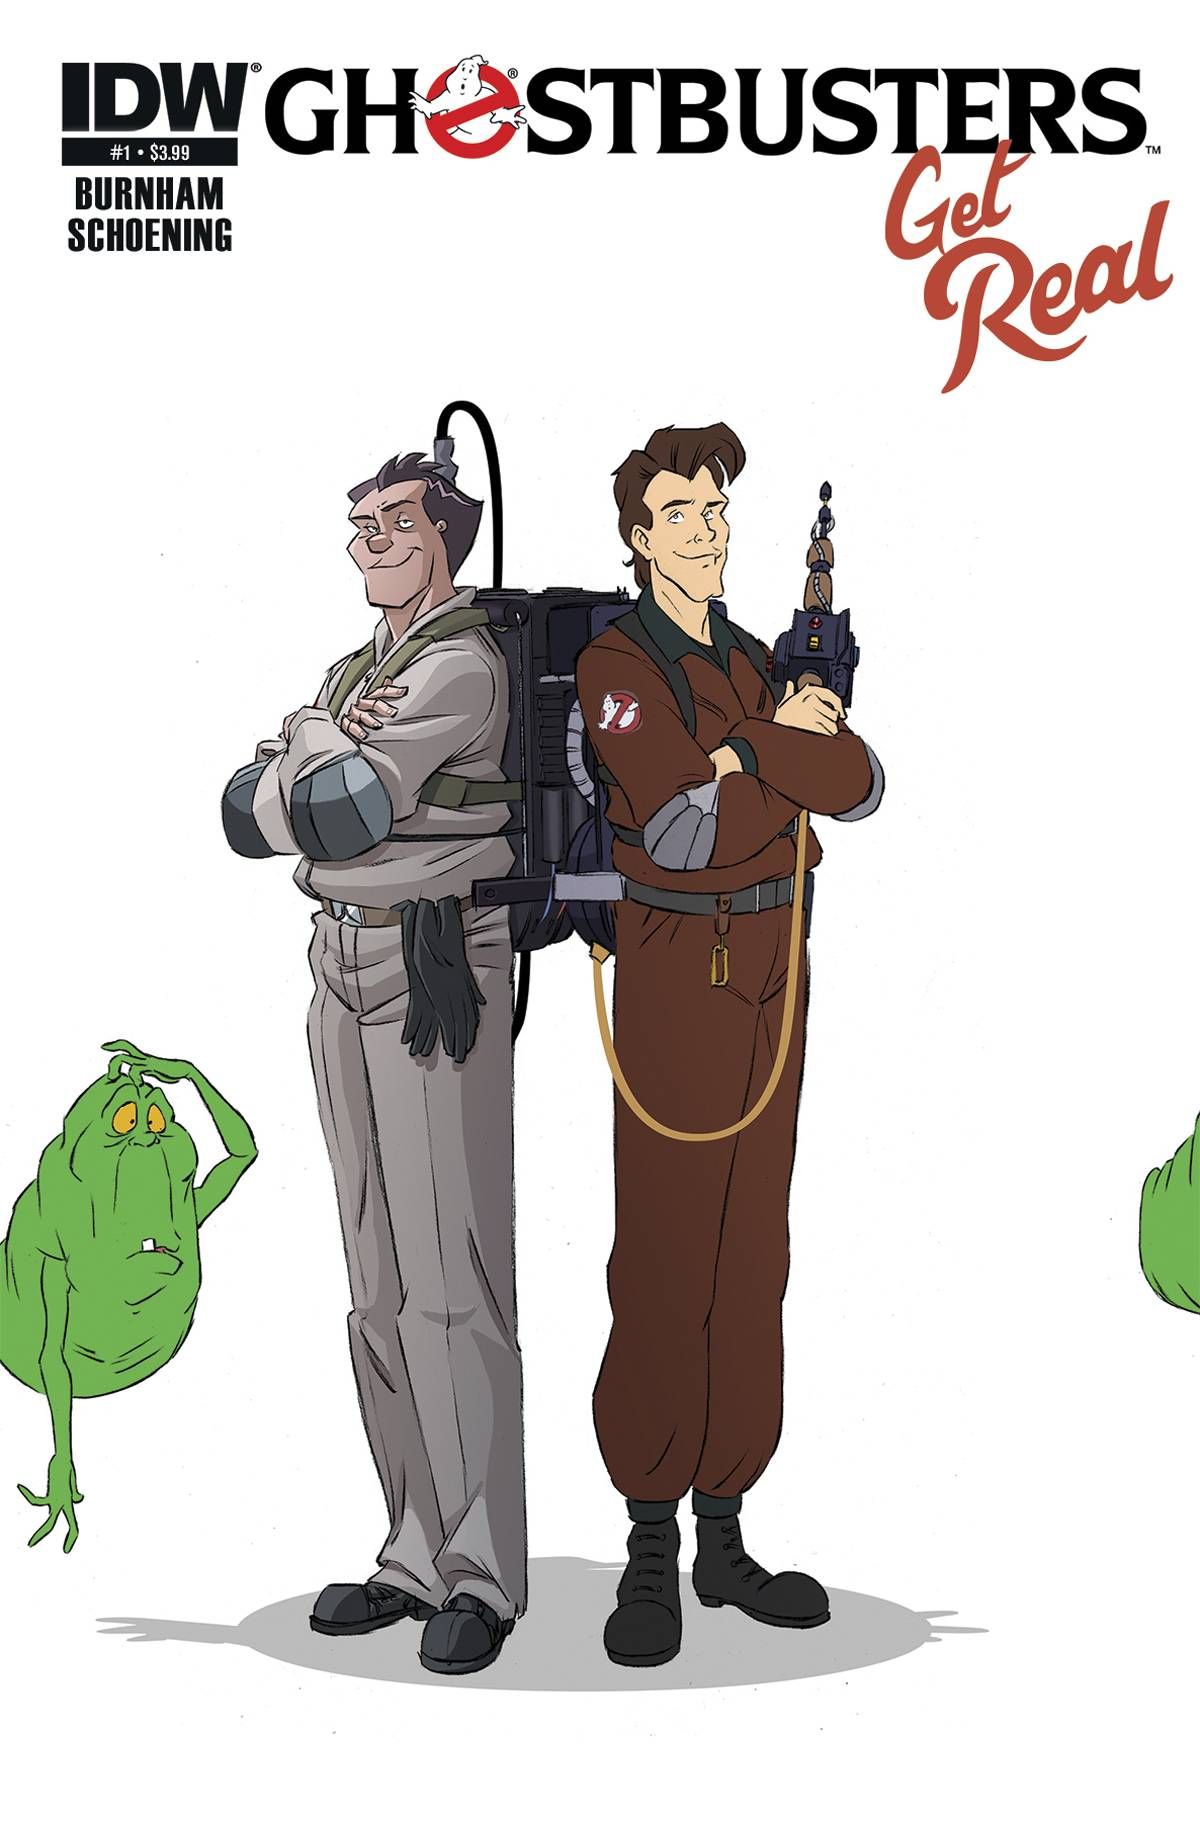 Ghostbusters Get Real #1 Comic